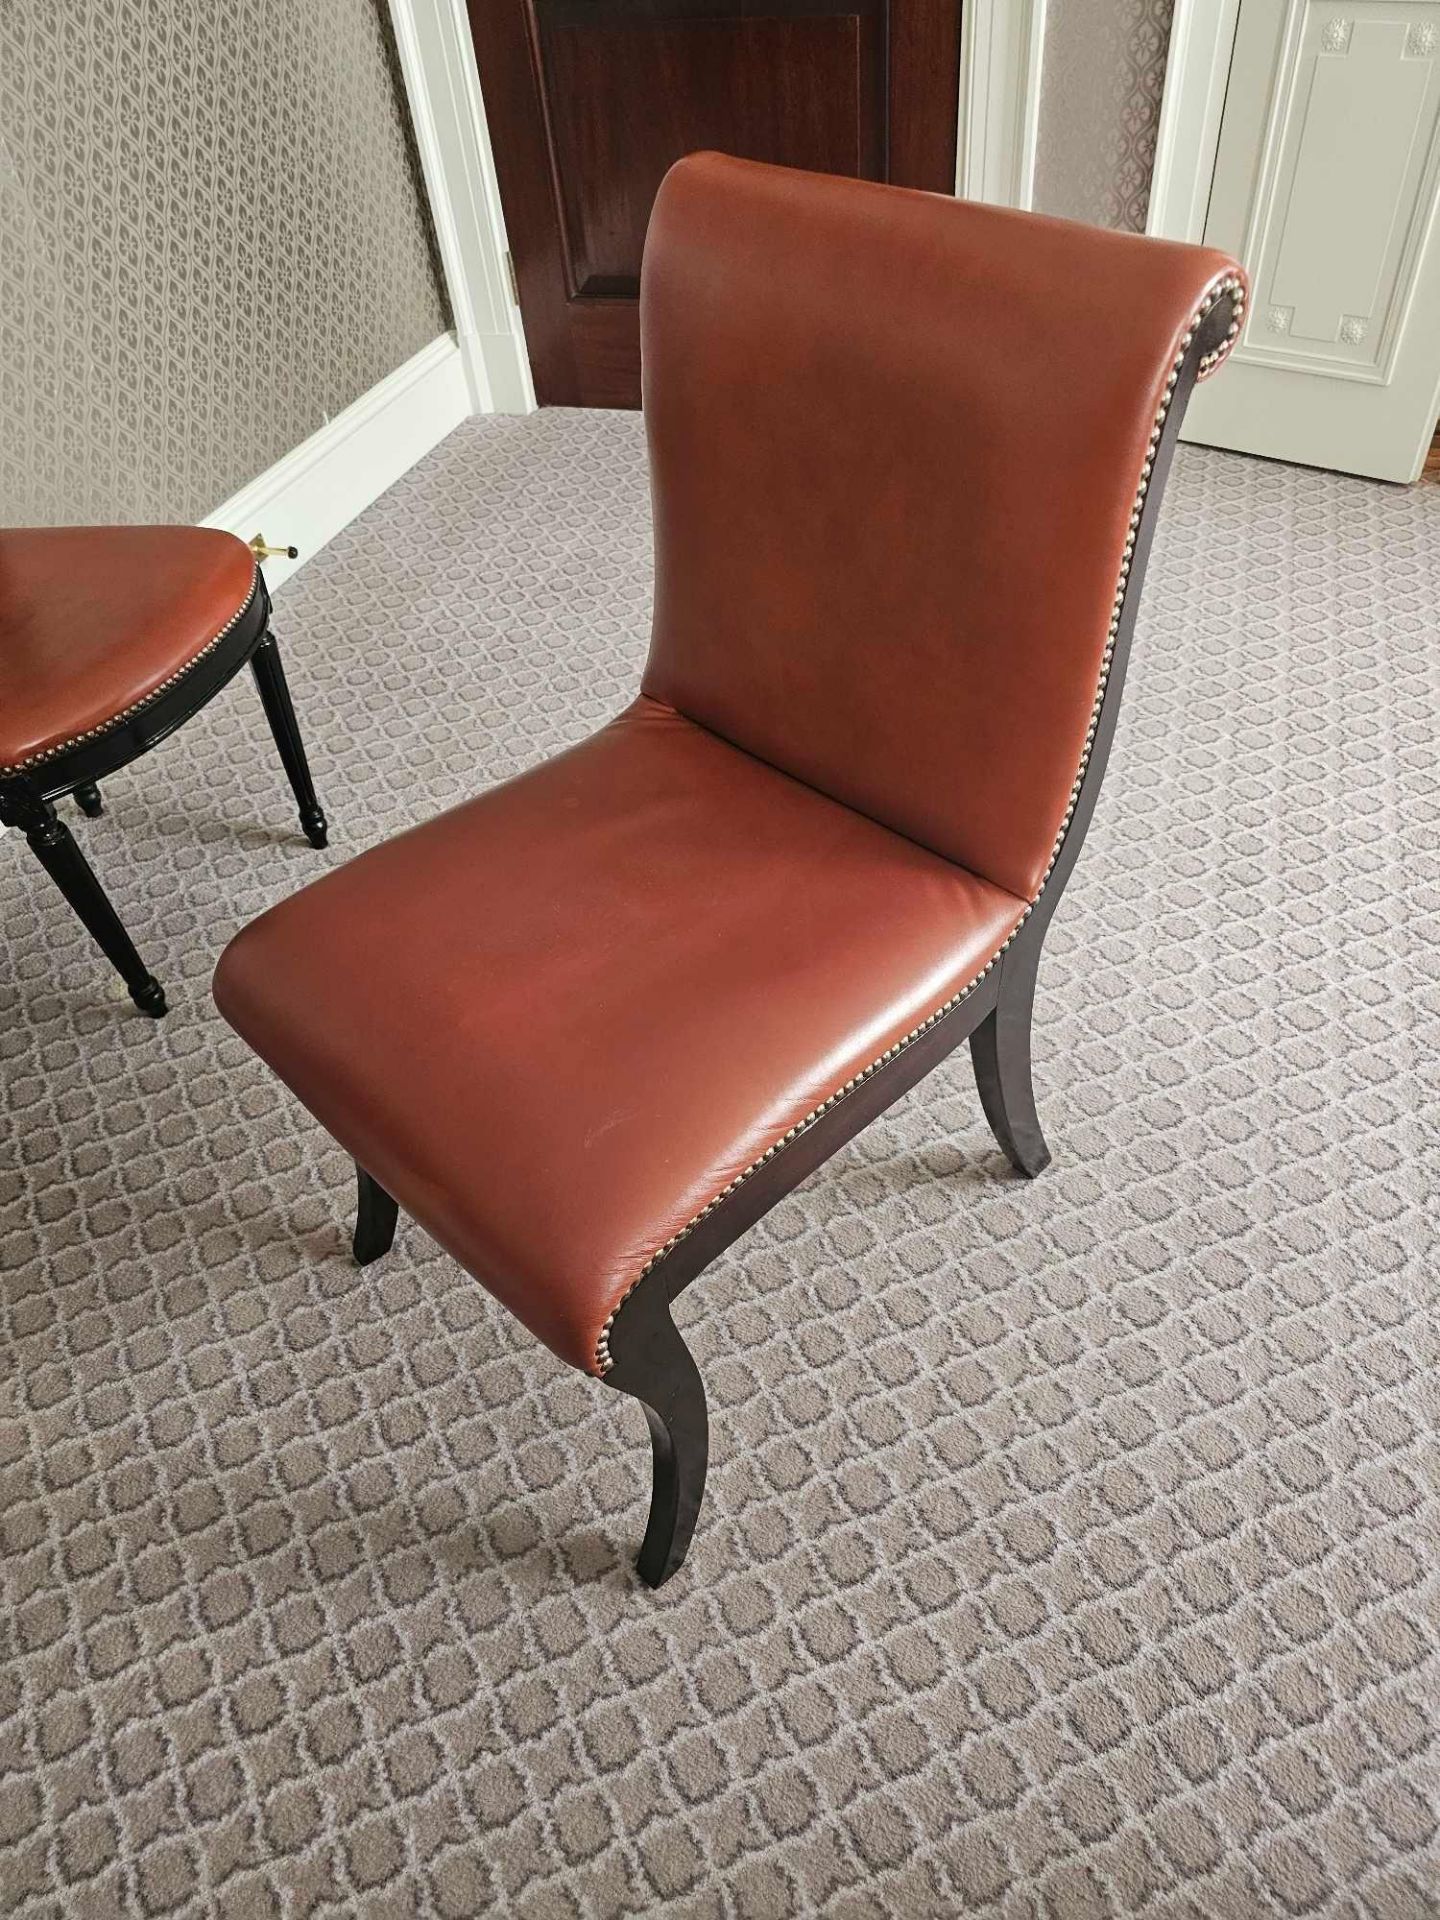 Scroll Back Leather Side Chair Legs And Frame In Solid Oak With A Stained Finish Upholstered In - Image 2 of 3